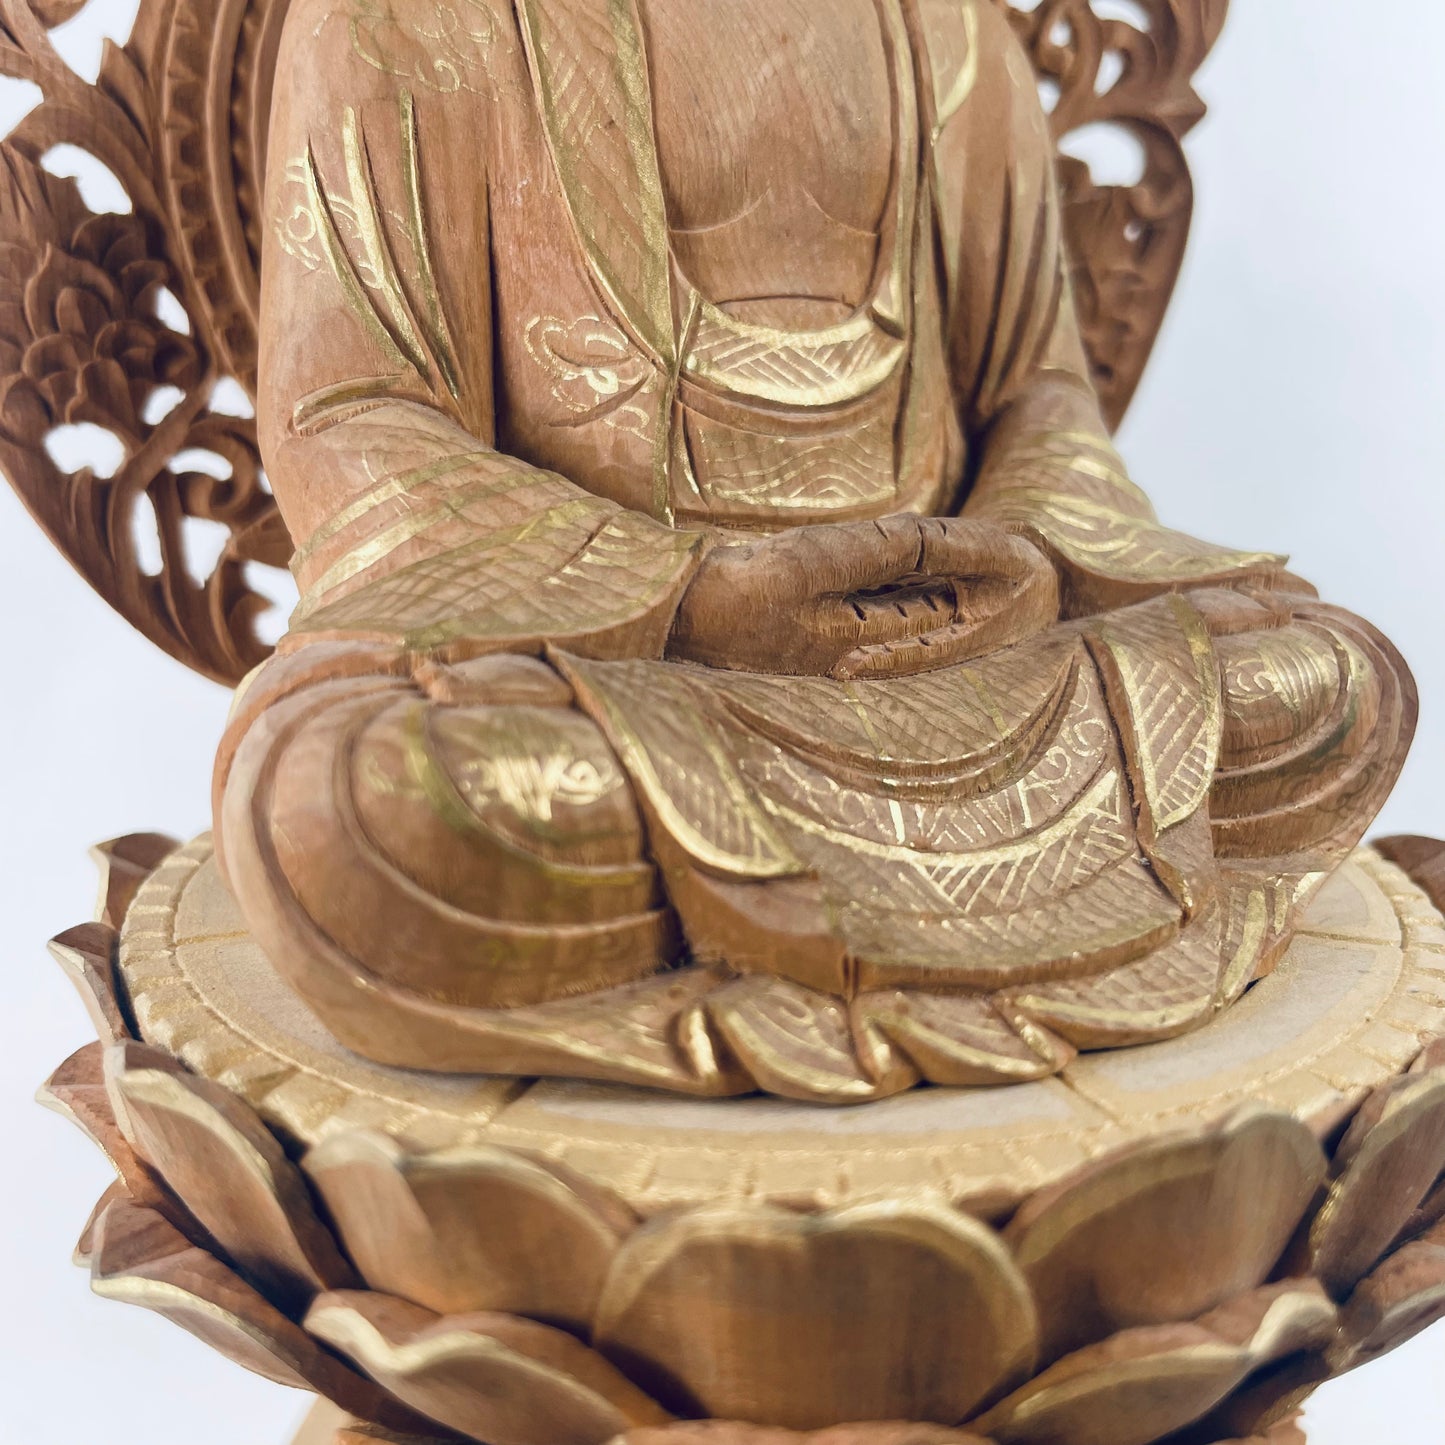 Statue of The Buddha in Seated Meditation Carved Wooden Japanese